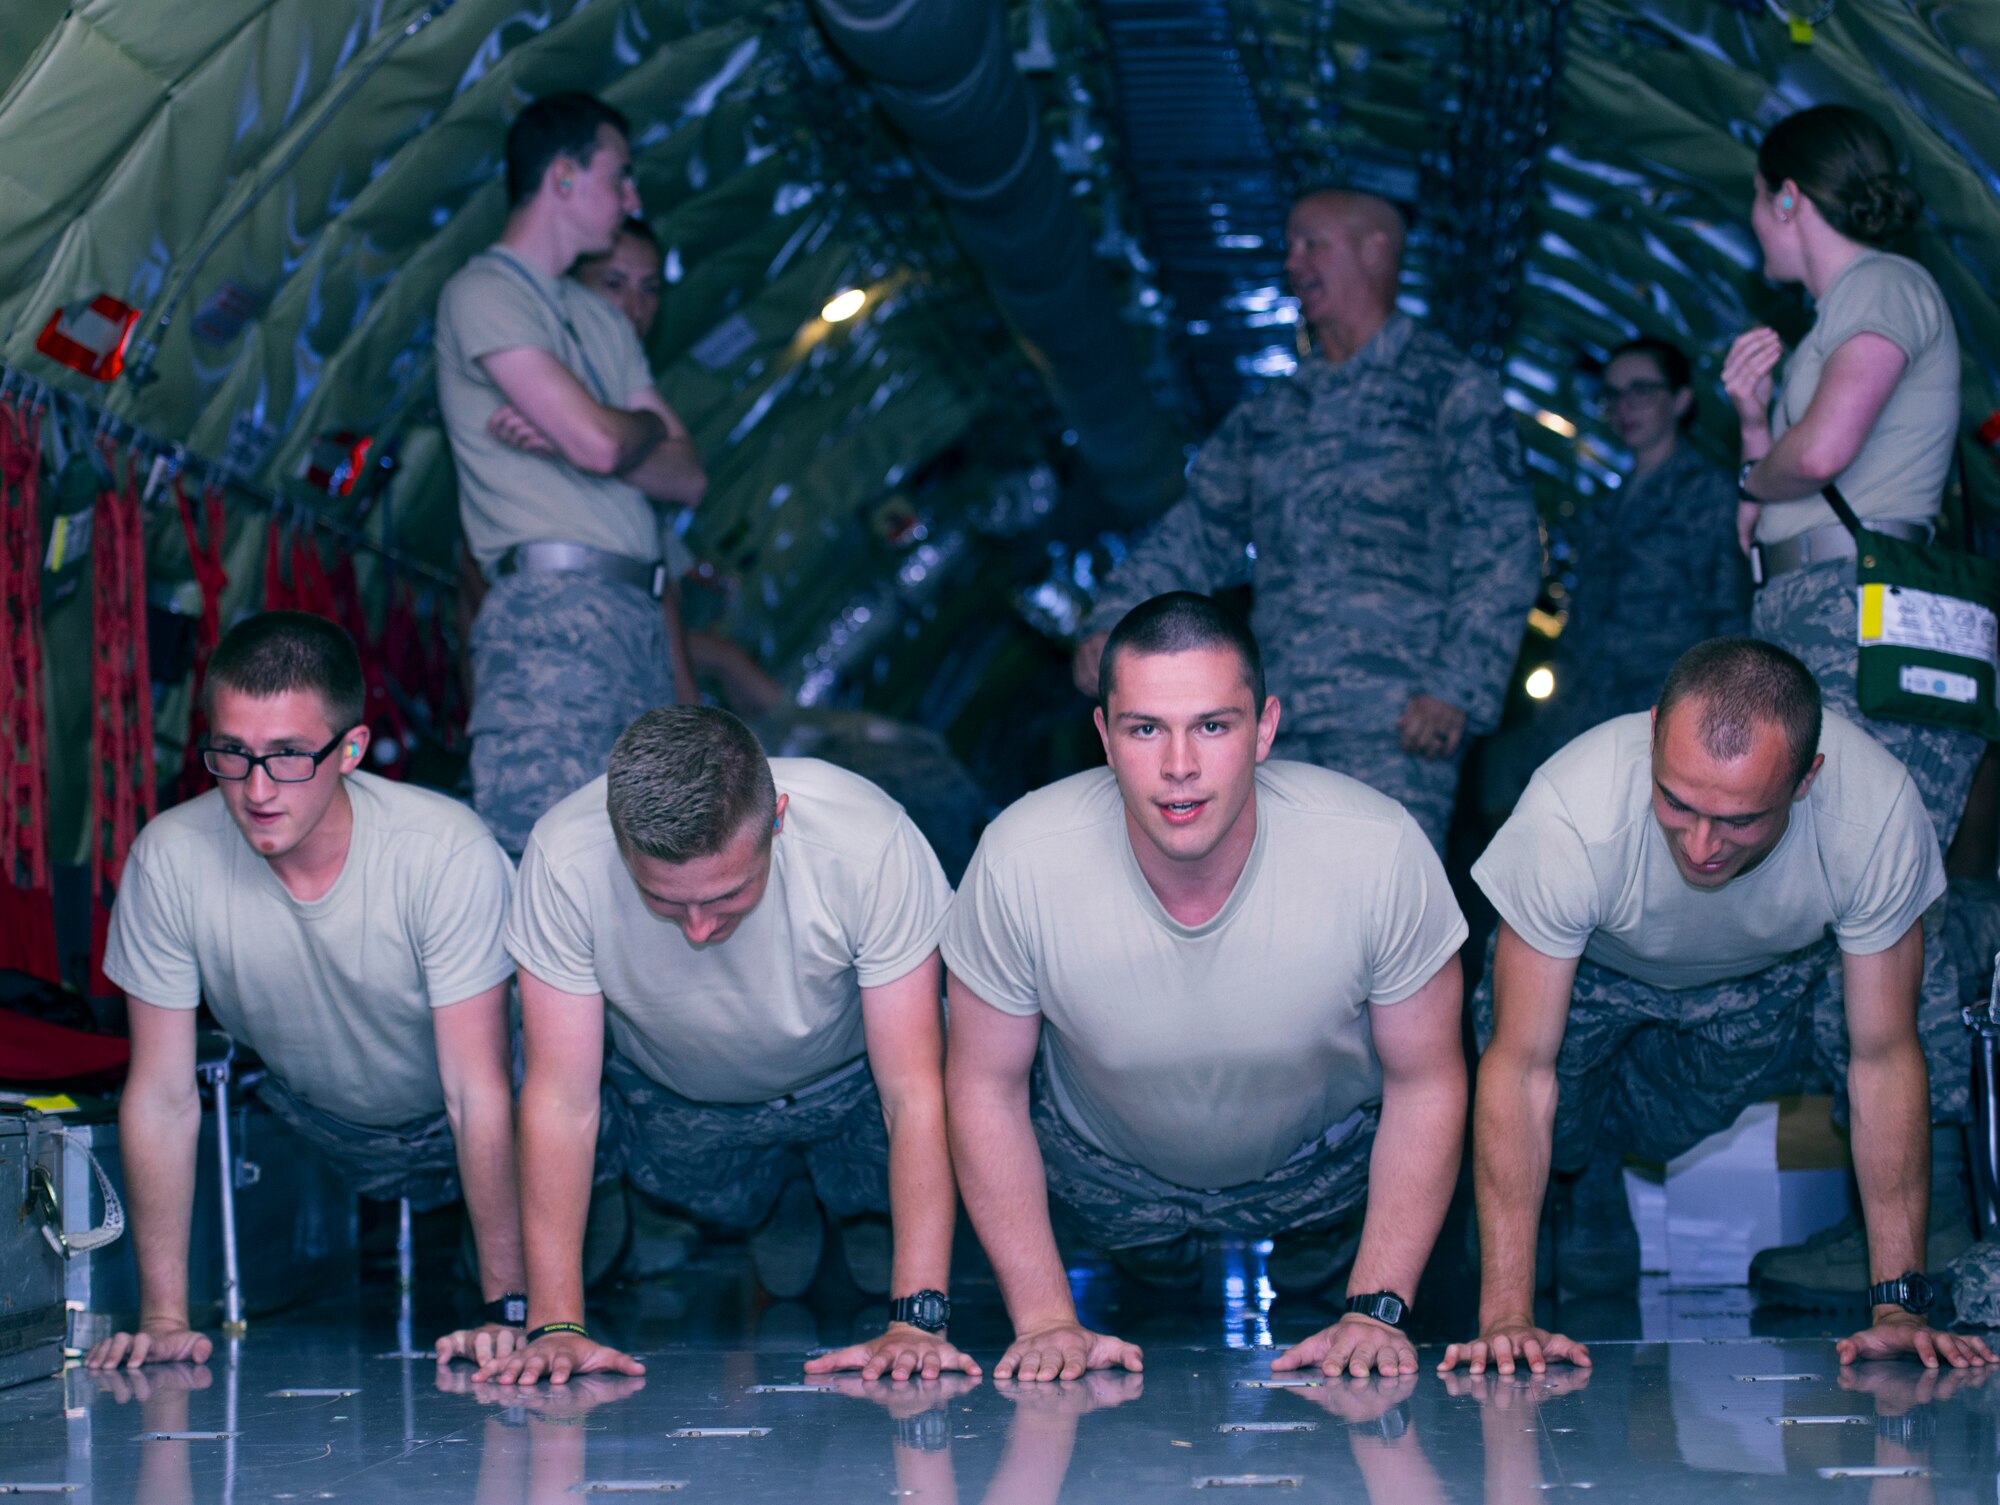 U.S. Air Force Reserve Officer Training Corps (ROTC) cadets perform pushups while calling cadence during a KC-135 Stratotanker aircraft incentive flight June 14, 2018 over the Eastern United States.